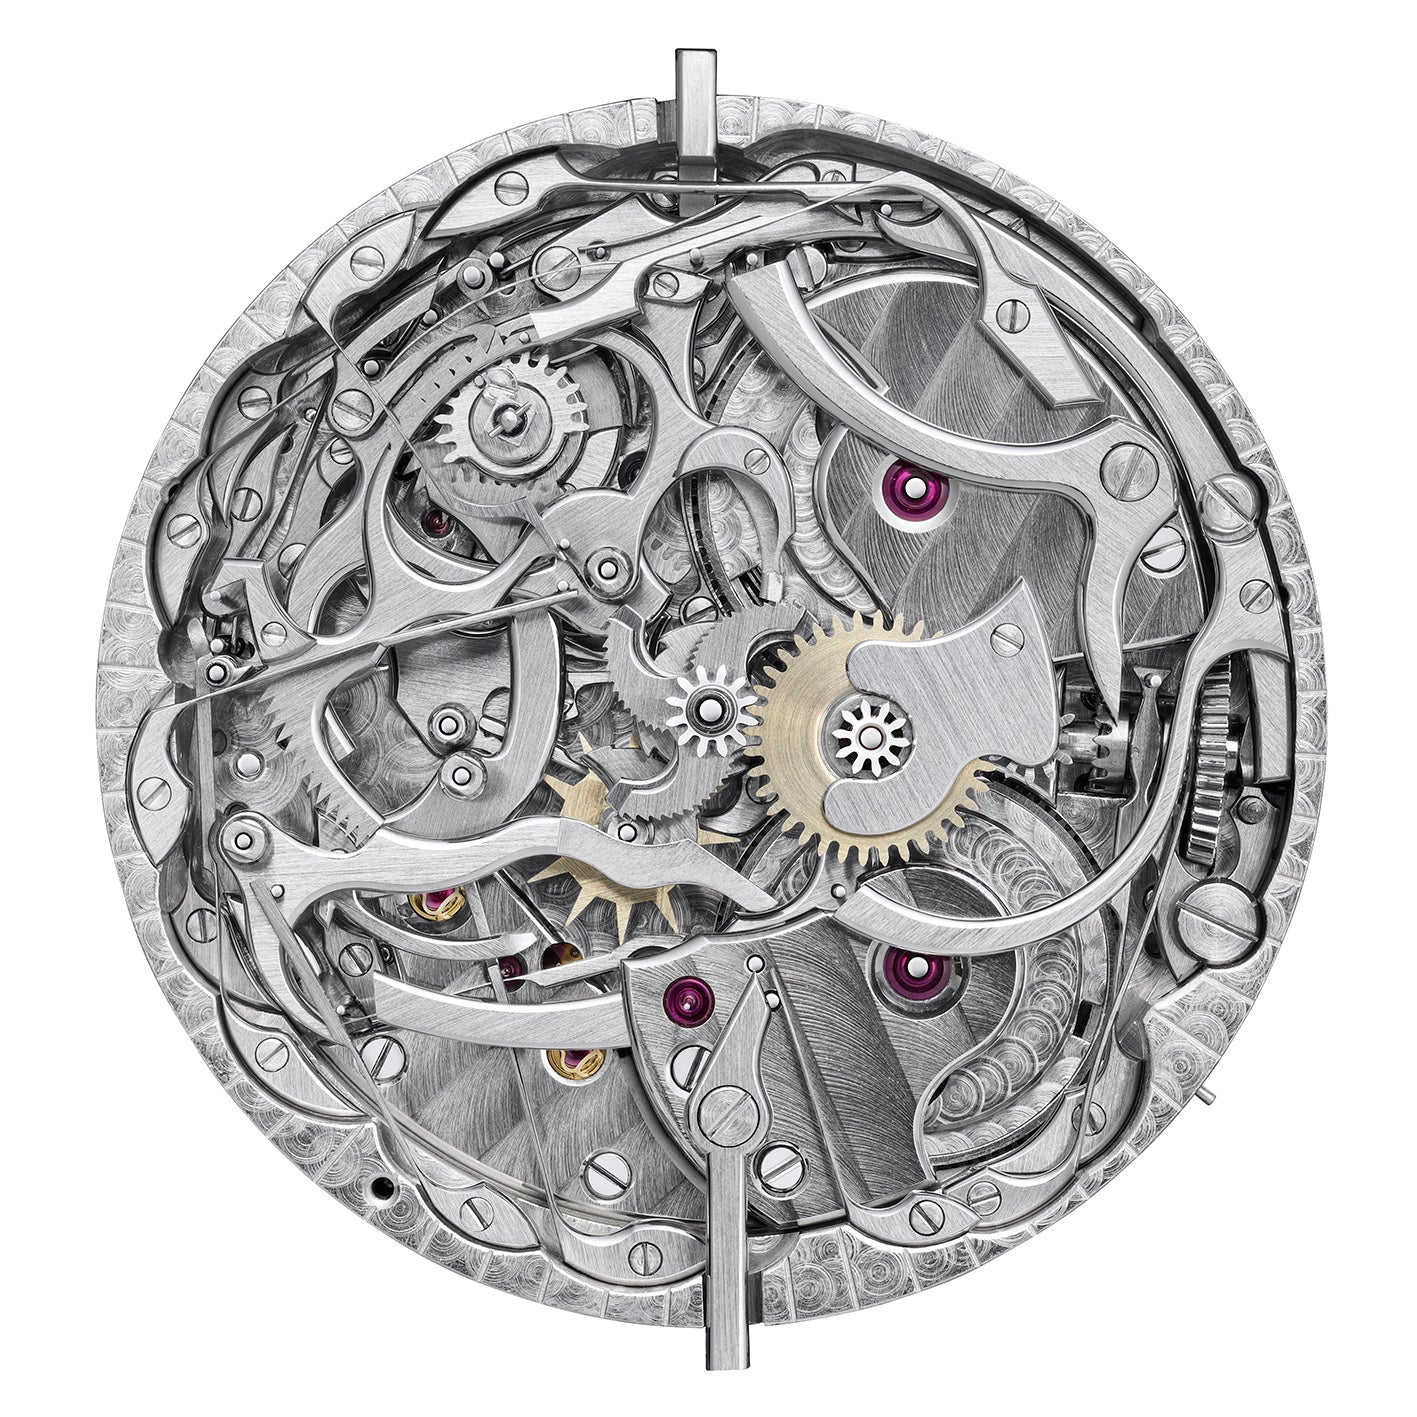 Grande Sonnerie Minute Repeater Philippe Dufour